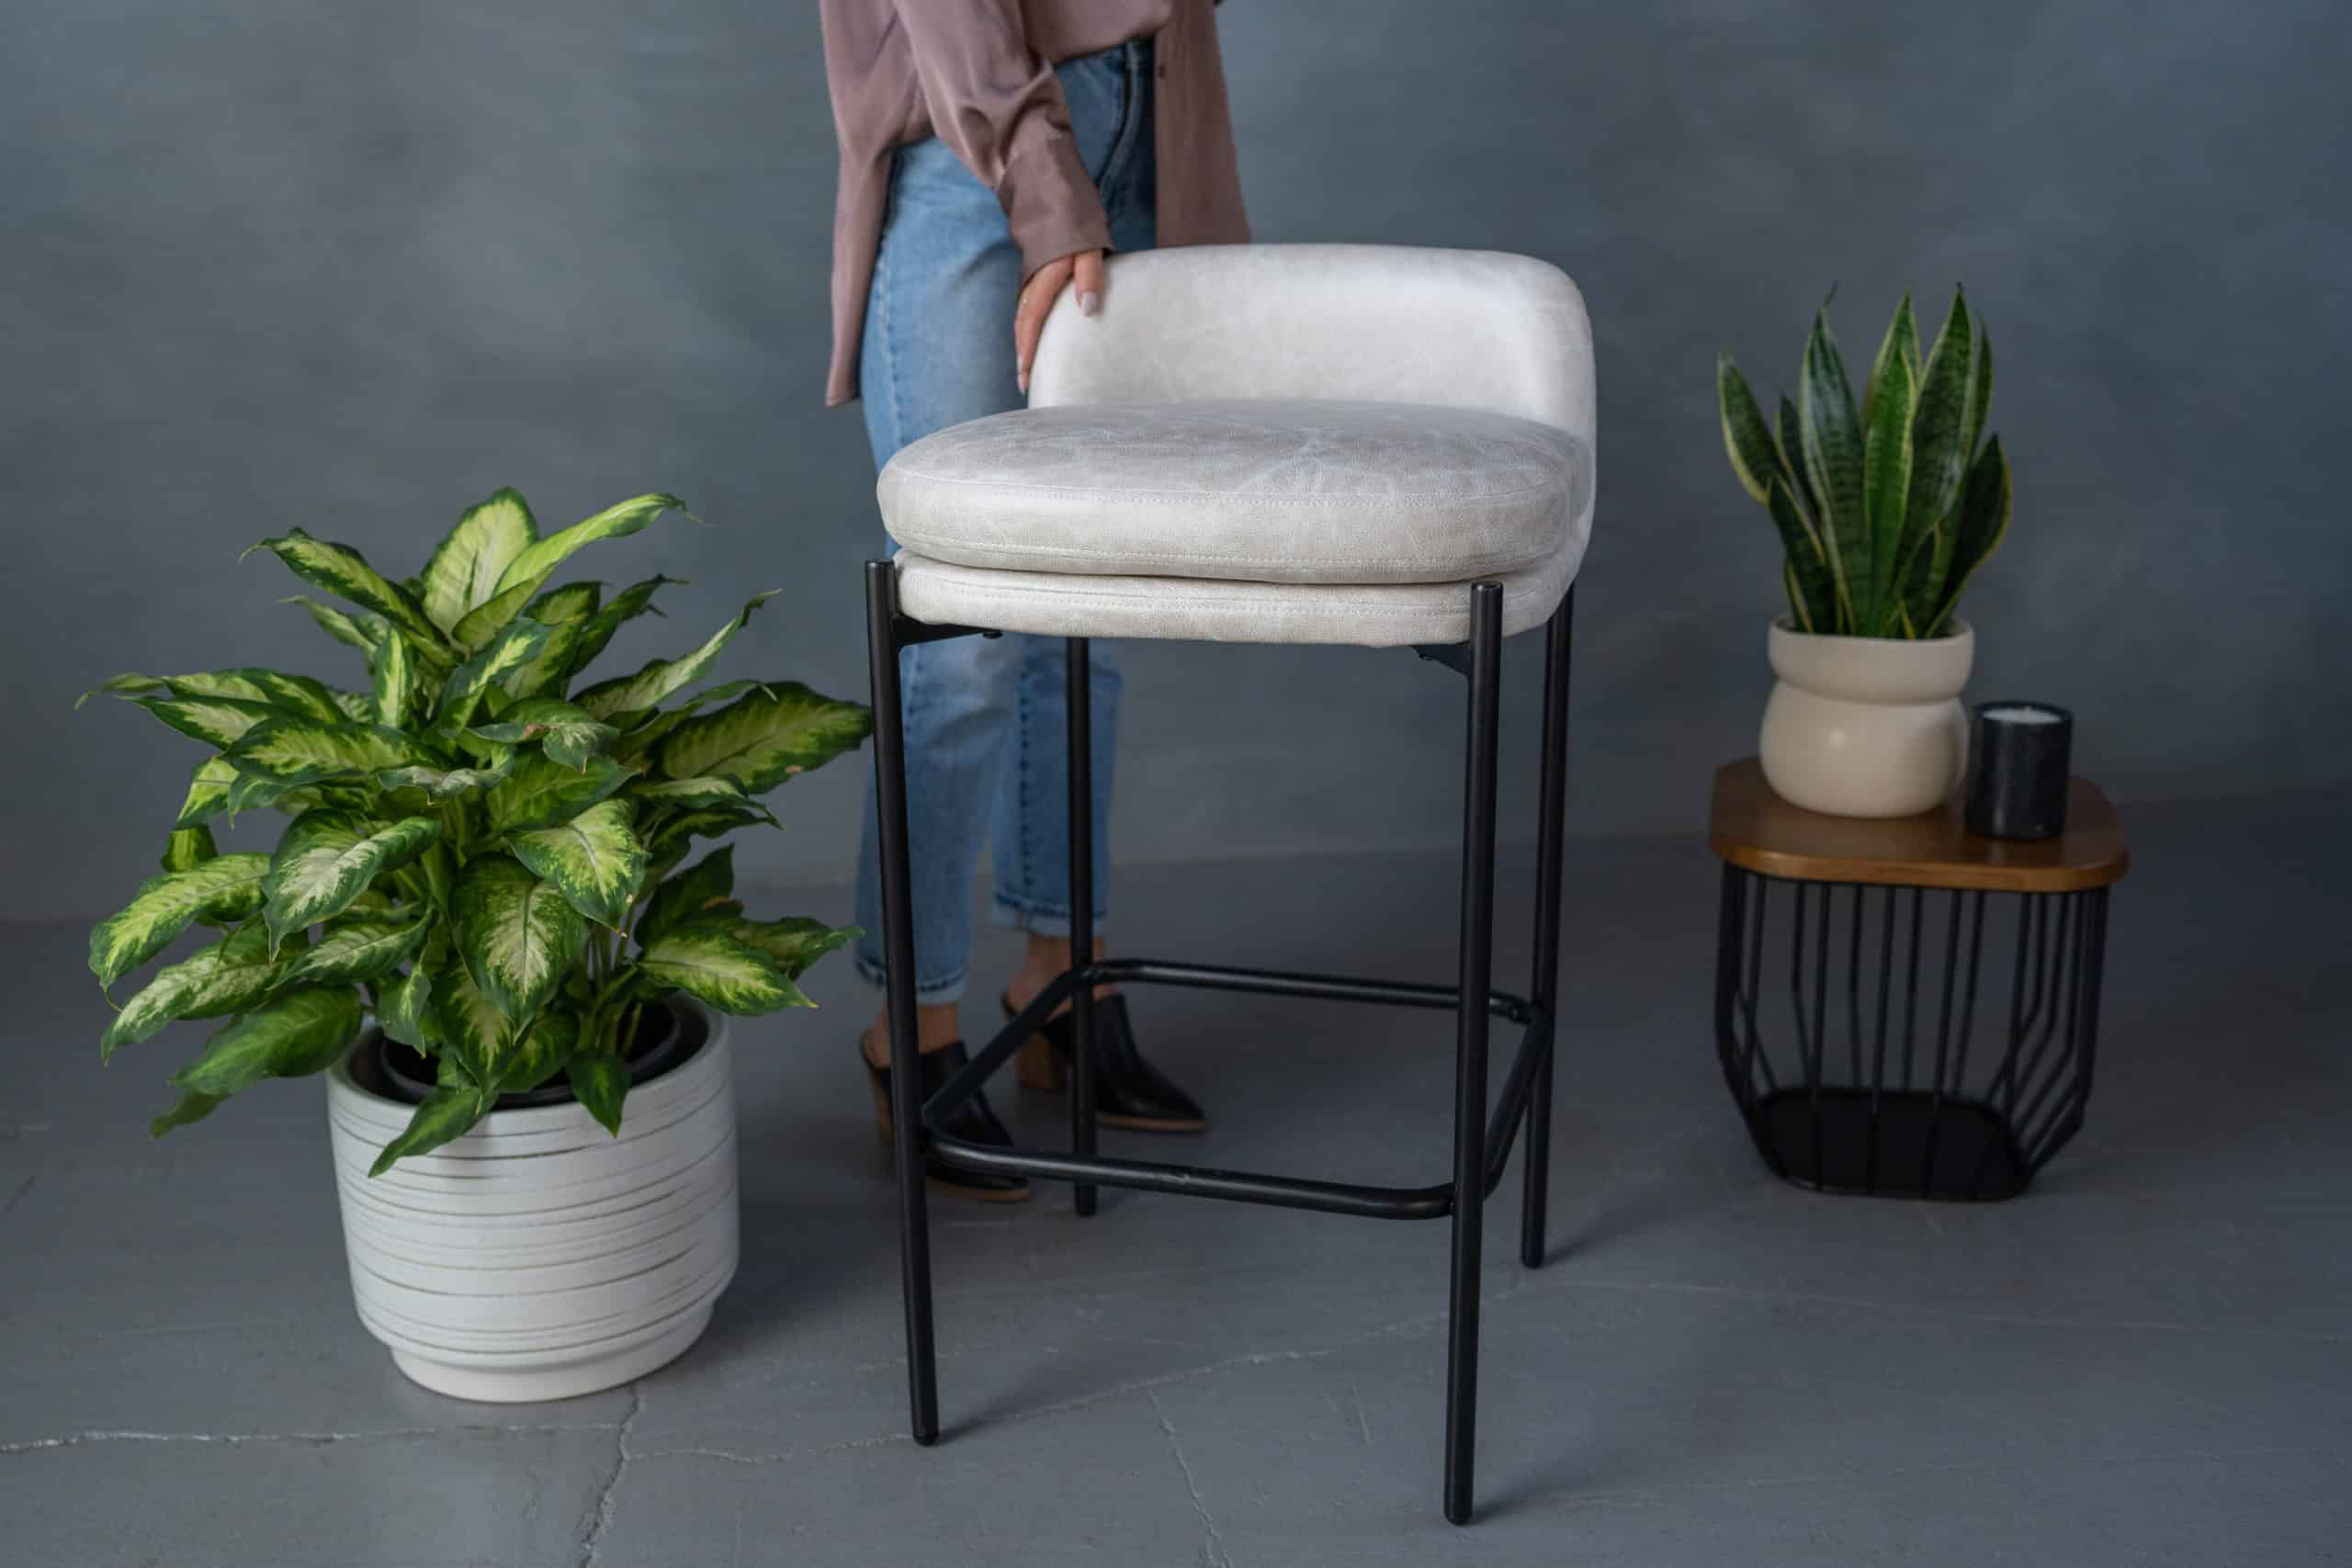 Consider a Wovenbyrd Modern Mid-Back Counter Stool in Distressed Tan Faux Leather as a Christmas gift this year.